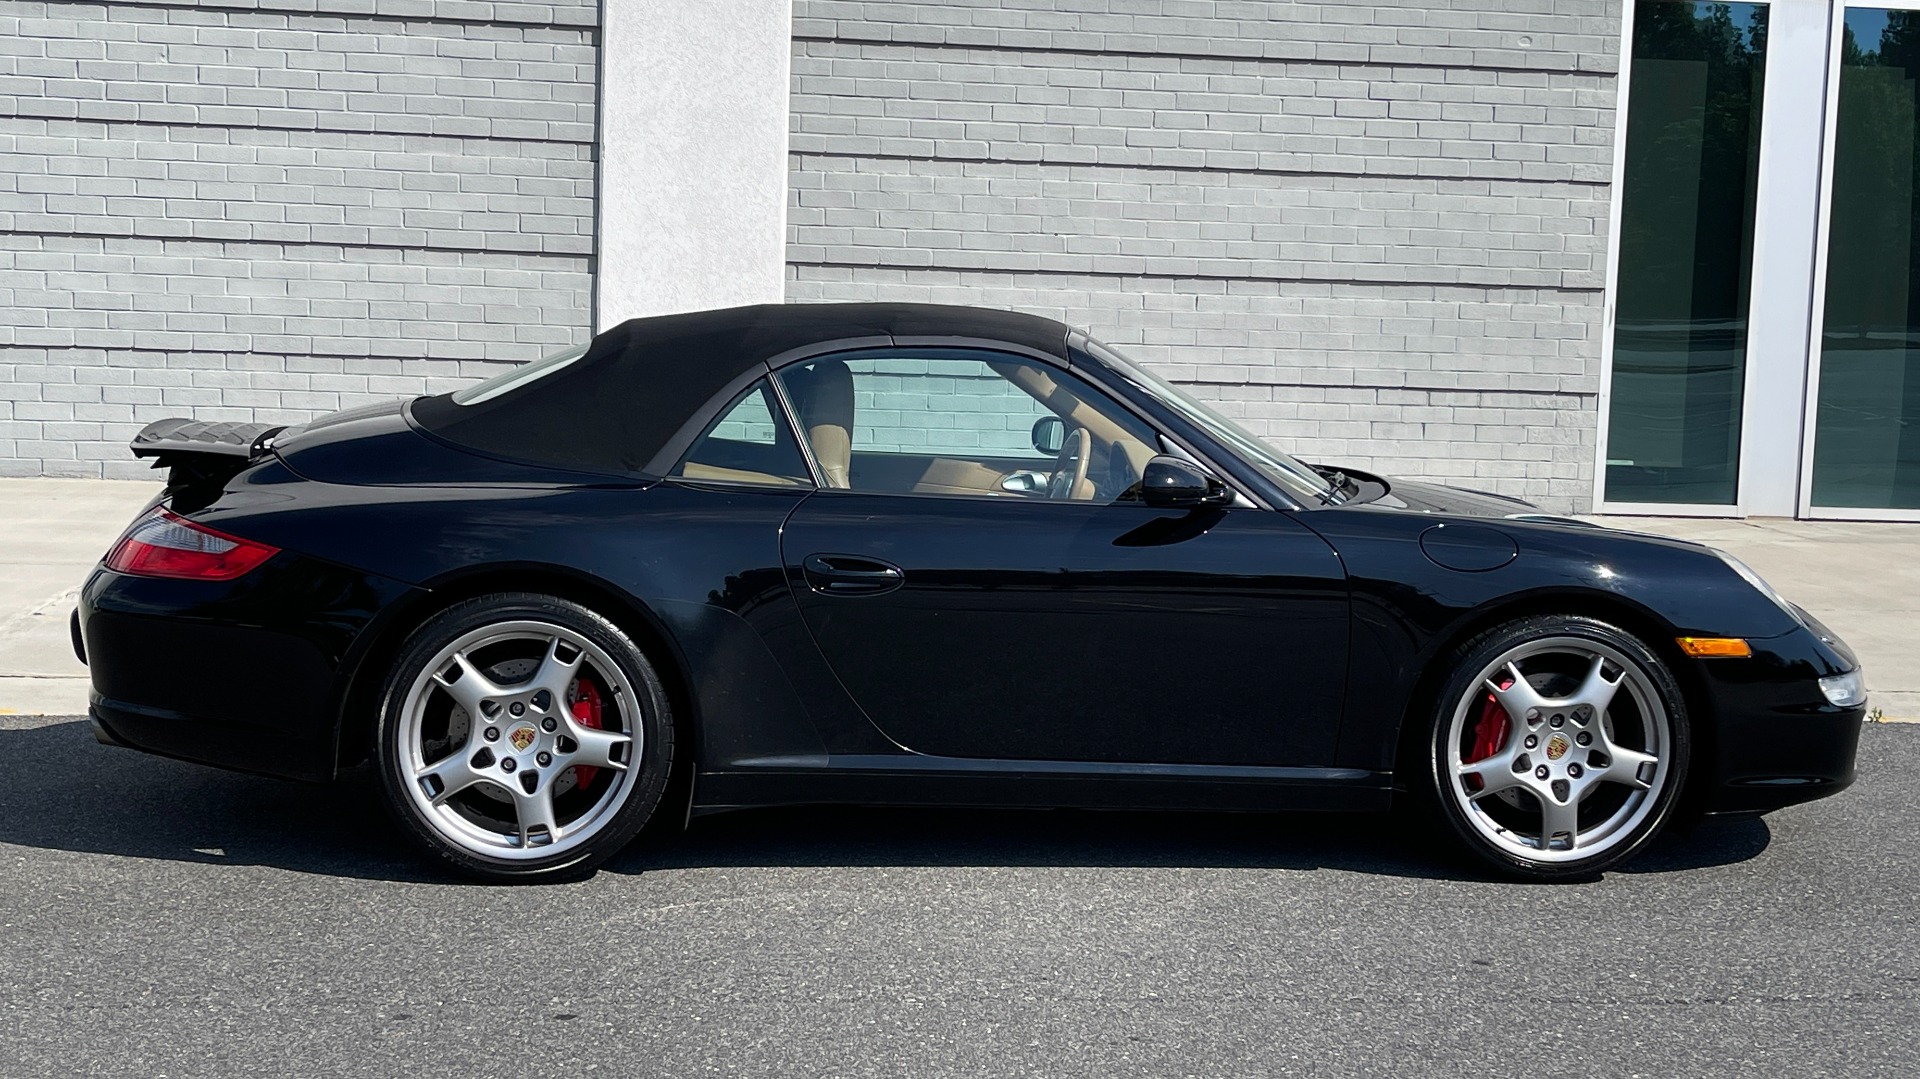 Used 2006 Porsche 911 CARRERA S CABRIOLET / BOSE / CD CHANGER / PWR SEAT PKG / HTD STS for sale $56,400 at Formula Imports in Charlotte NC 28227 45